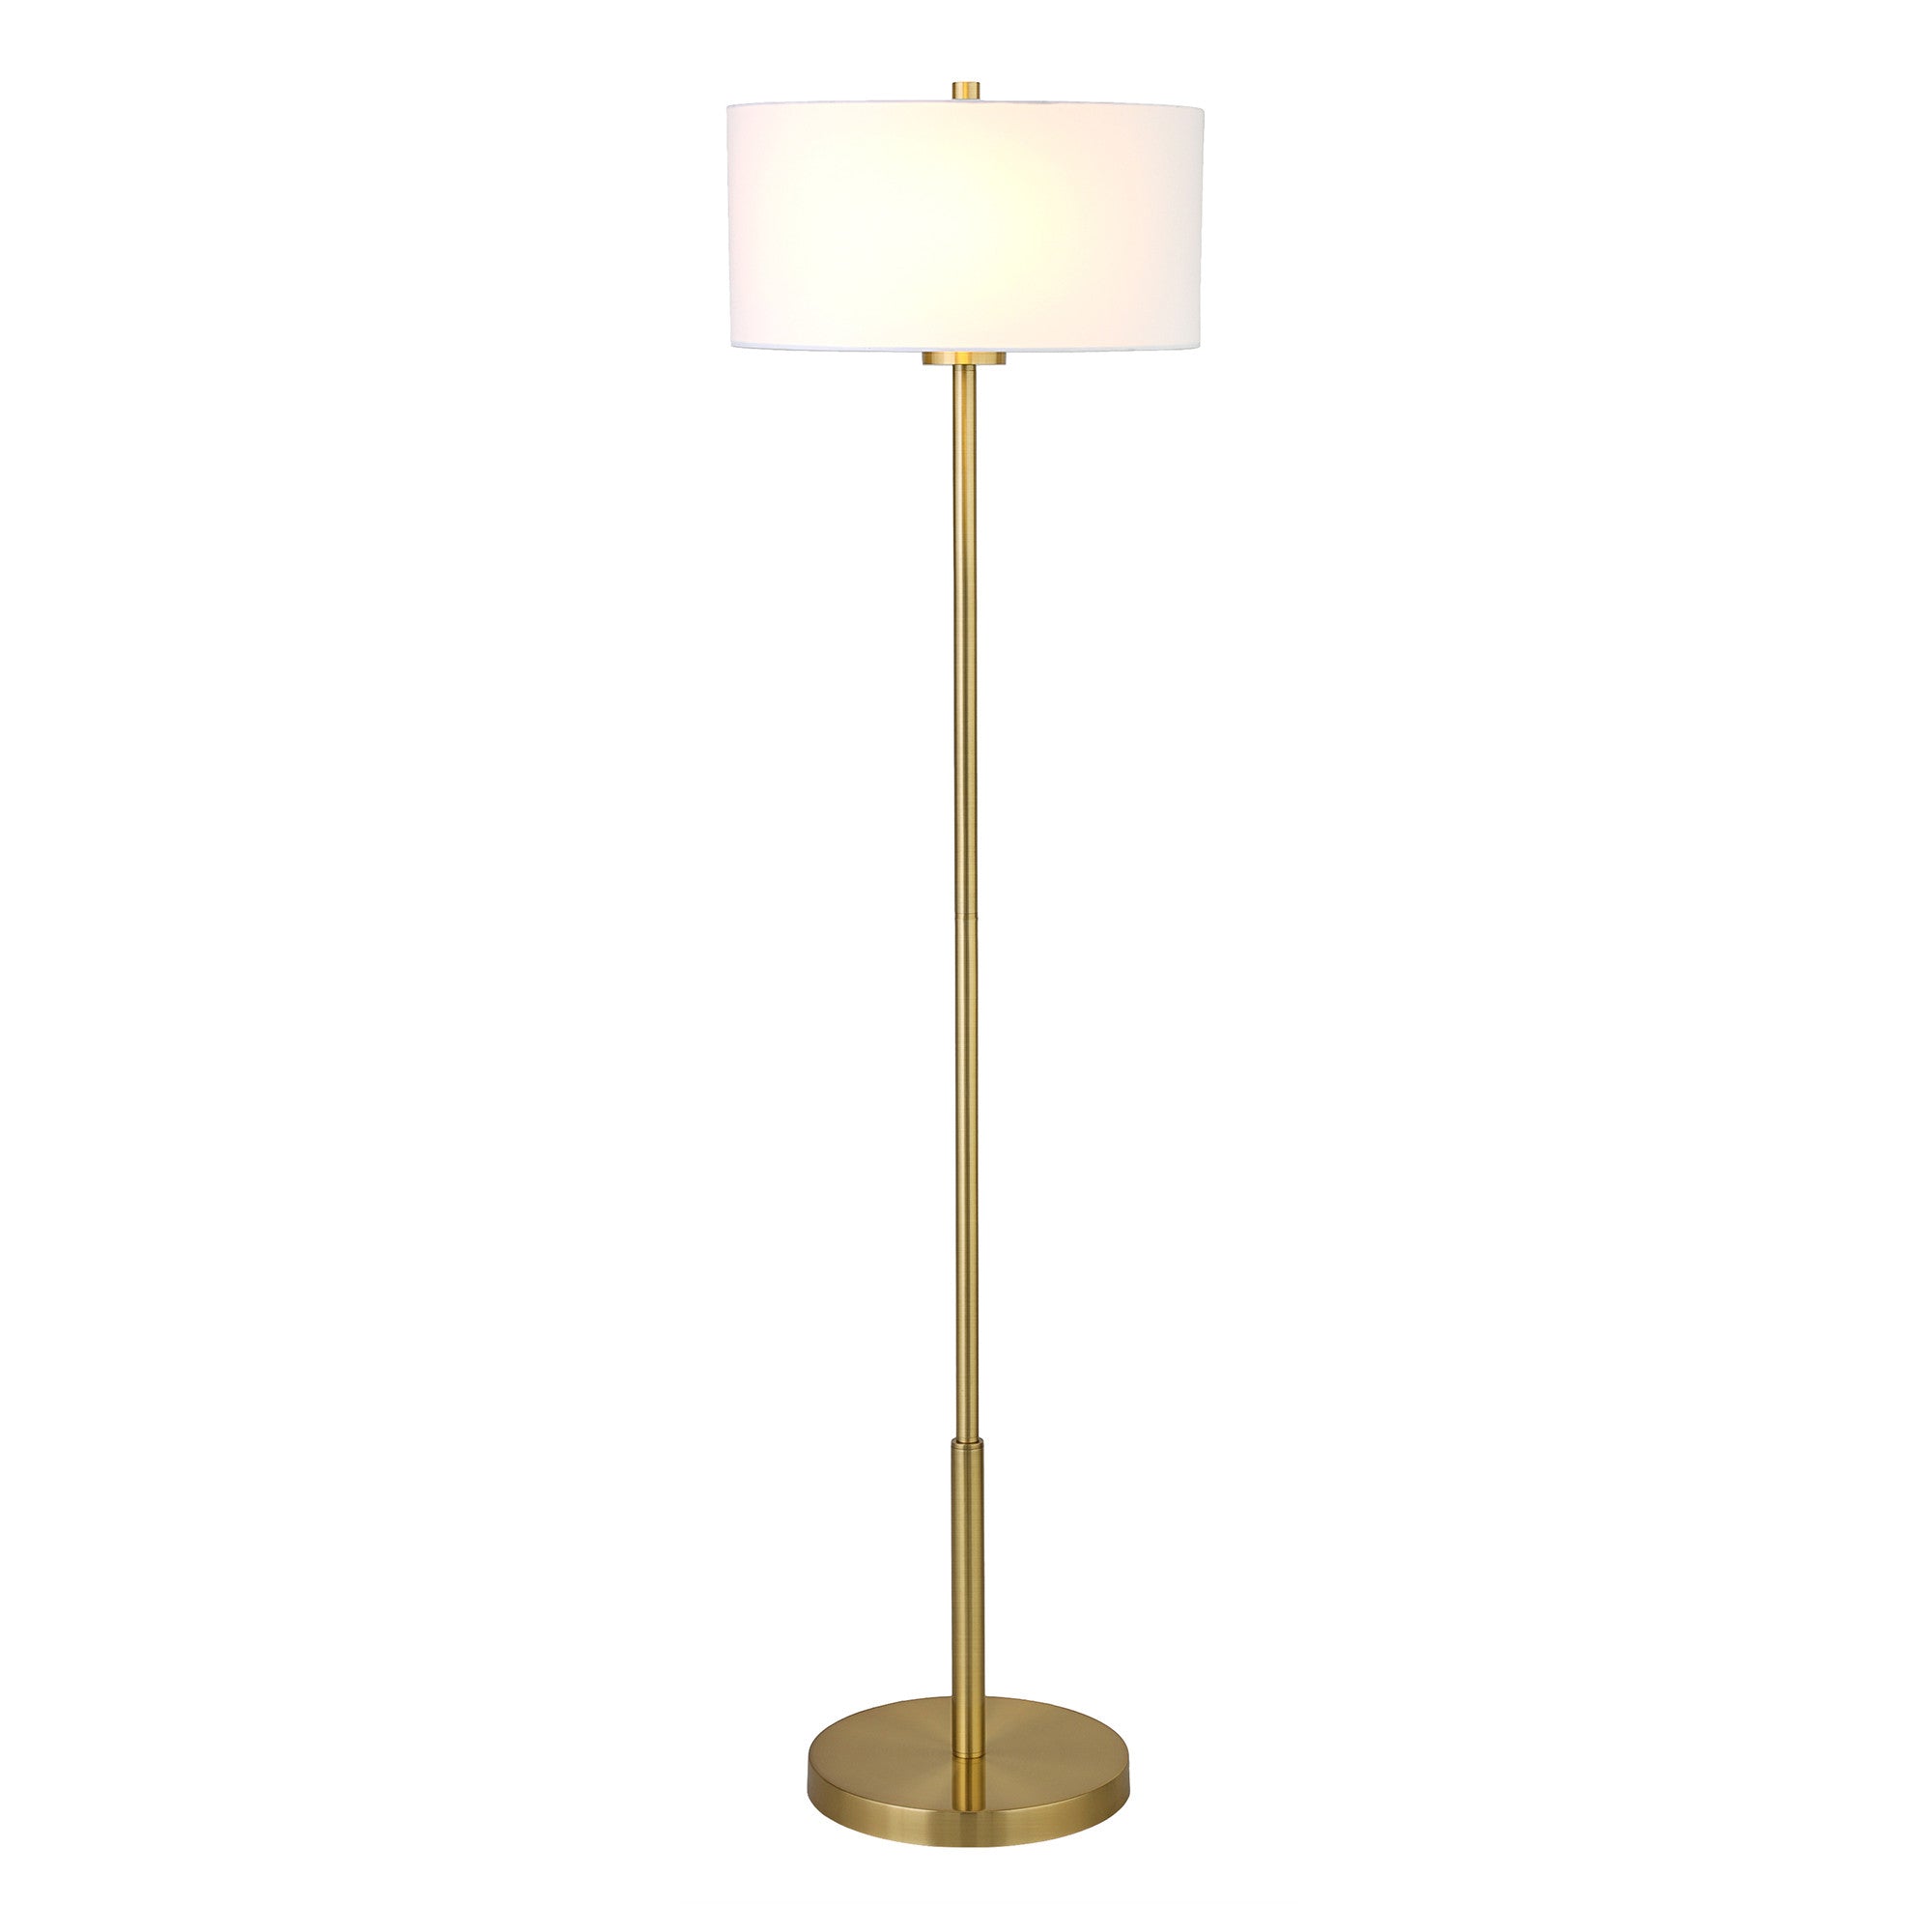 61" Brass Traditional Shaped Floor Lamp With White Drum Shade